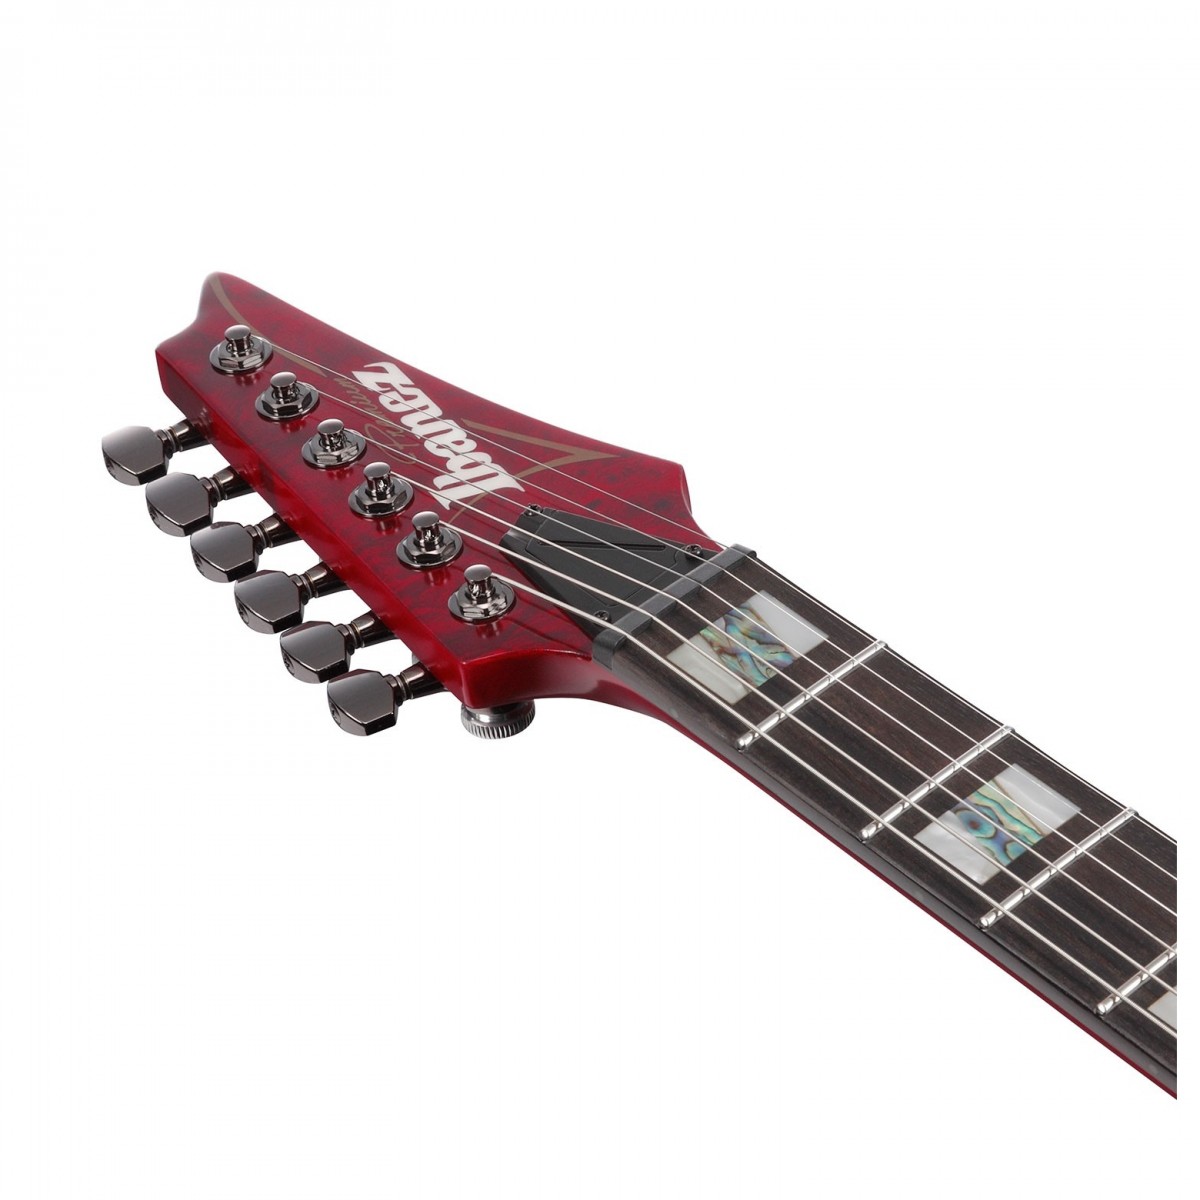 Ibanez Rgt1221pb Swl Premium 2h Dimarzio Ht Eb - Stained Wine Red Low Gloss - E-Gitarre in Str-Form - Variation 4